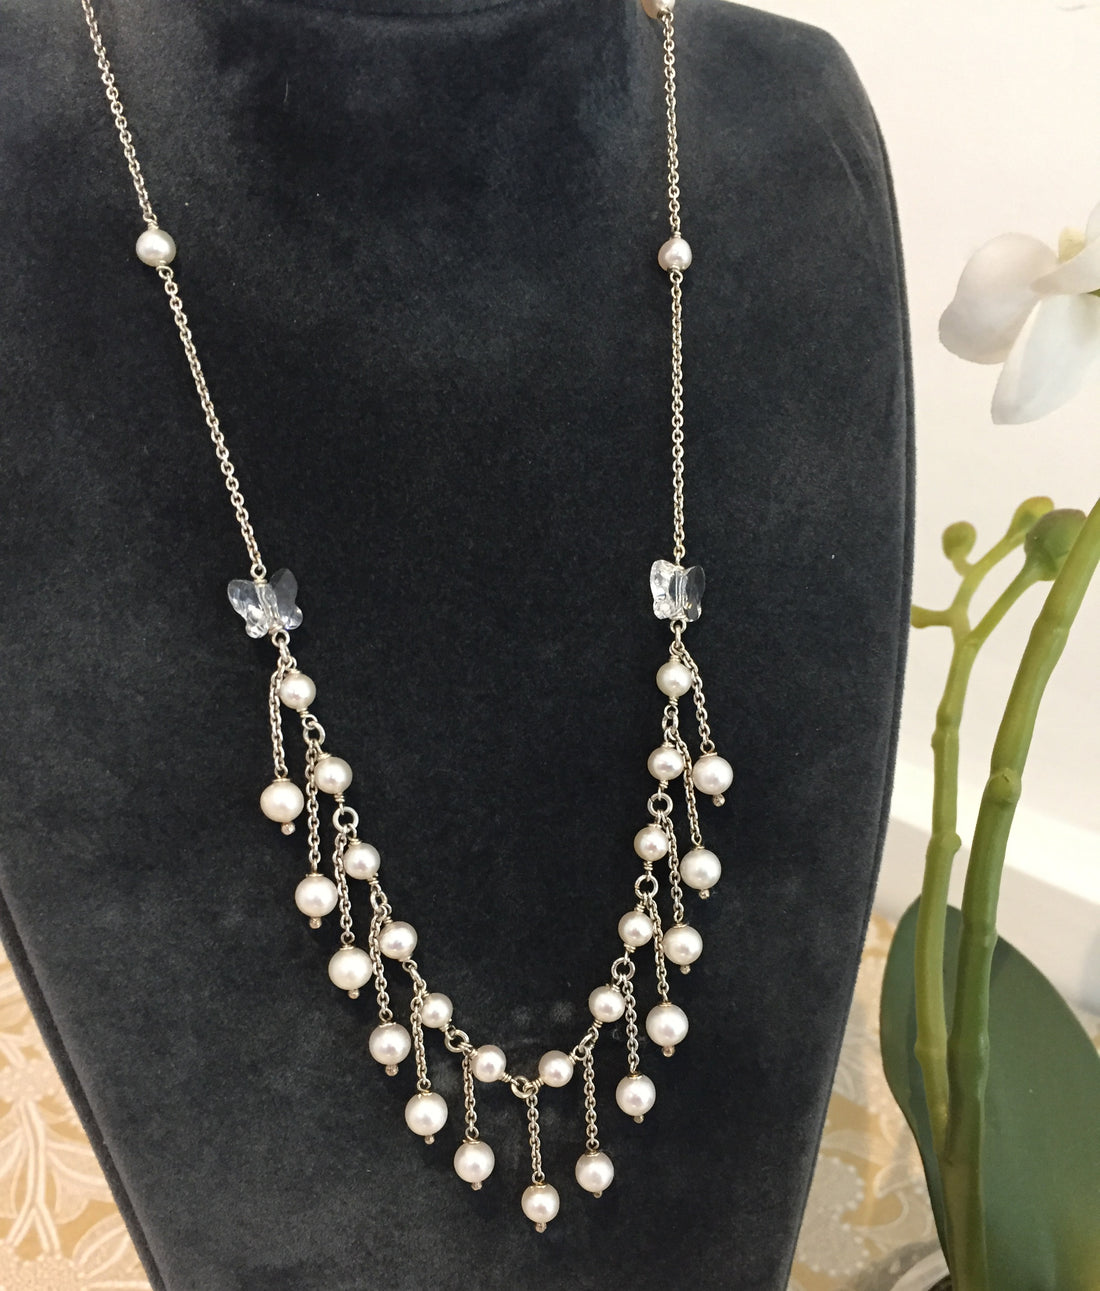 Competition: Win a stunning silver & freshwater pearl necklace!